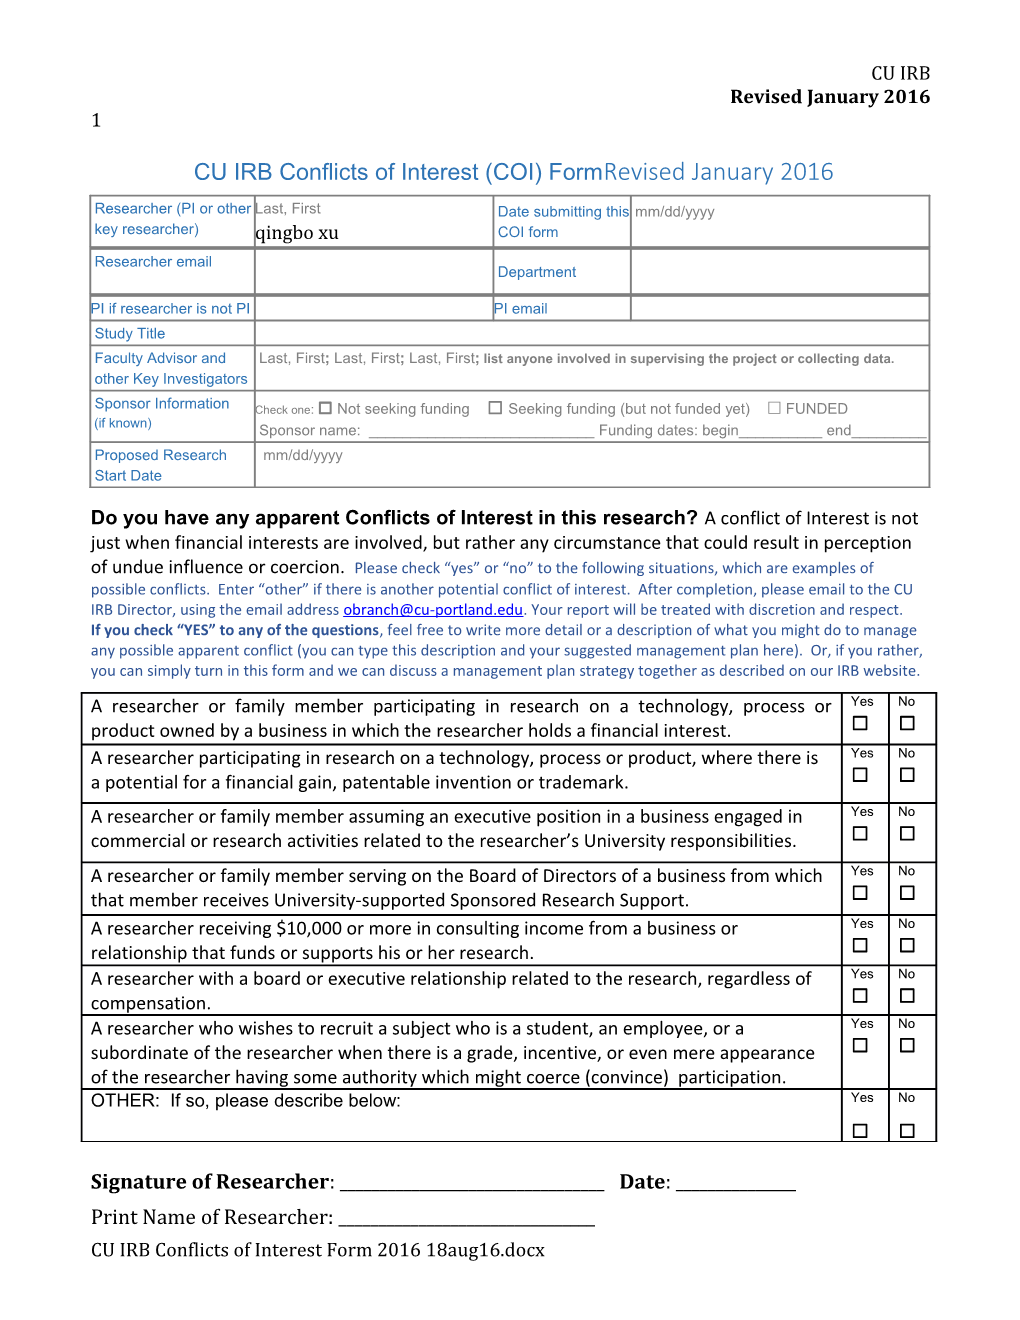 CU IRB Conflicts of Interest(COI) Form